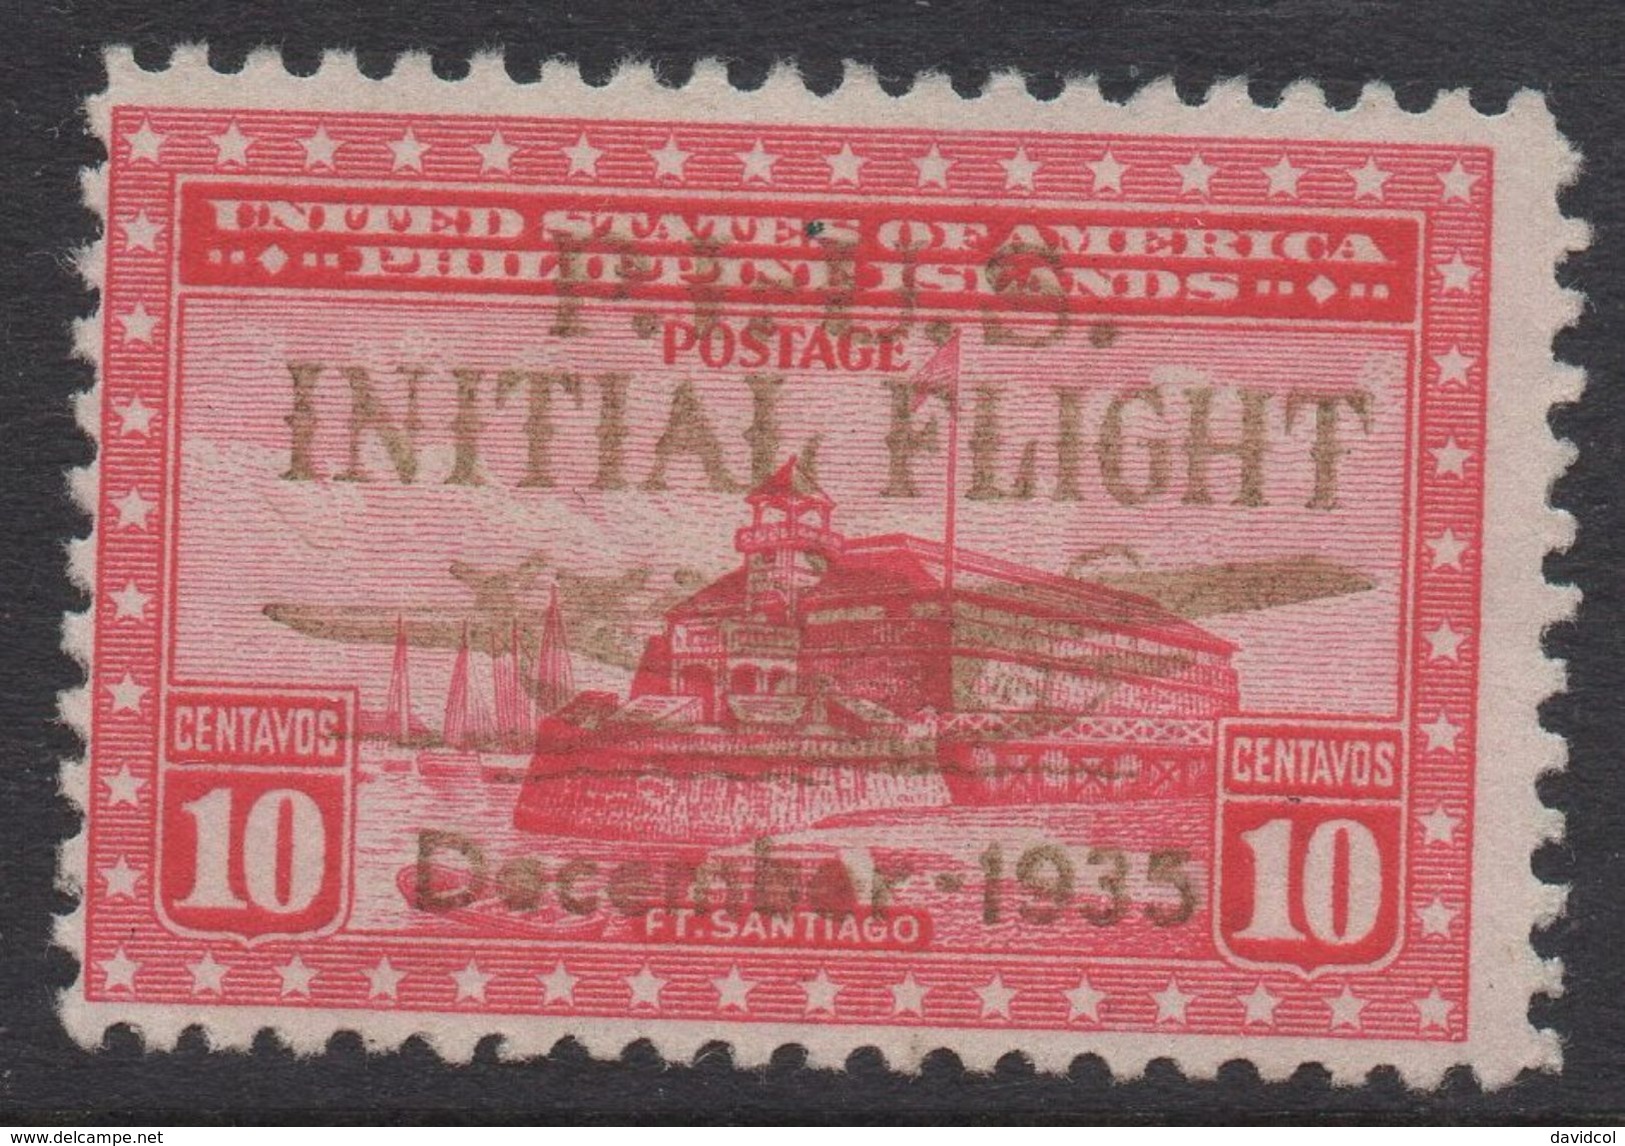 R279.-. USA- 1935 - OVERPRINTED - P.I.-US INITIAL FLIGHT -DECEMBER 1935- PHILIPPINES -USED - Philippines